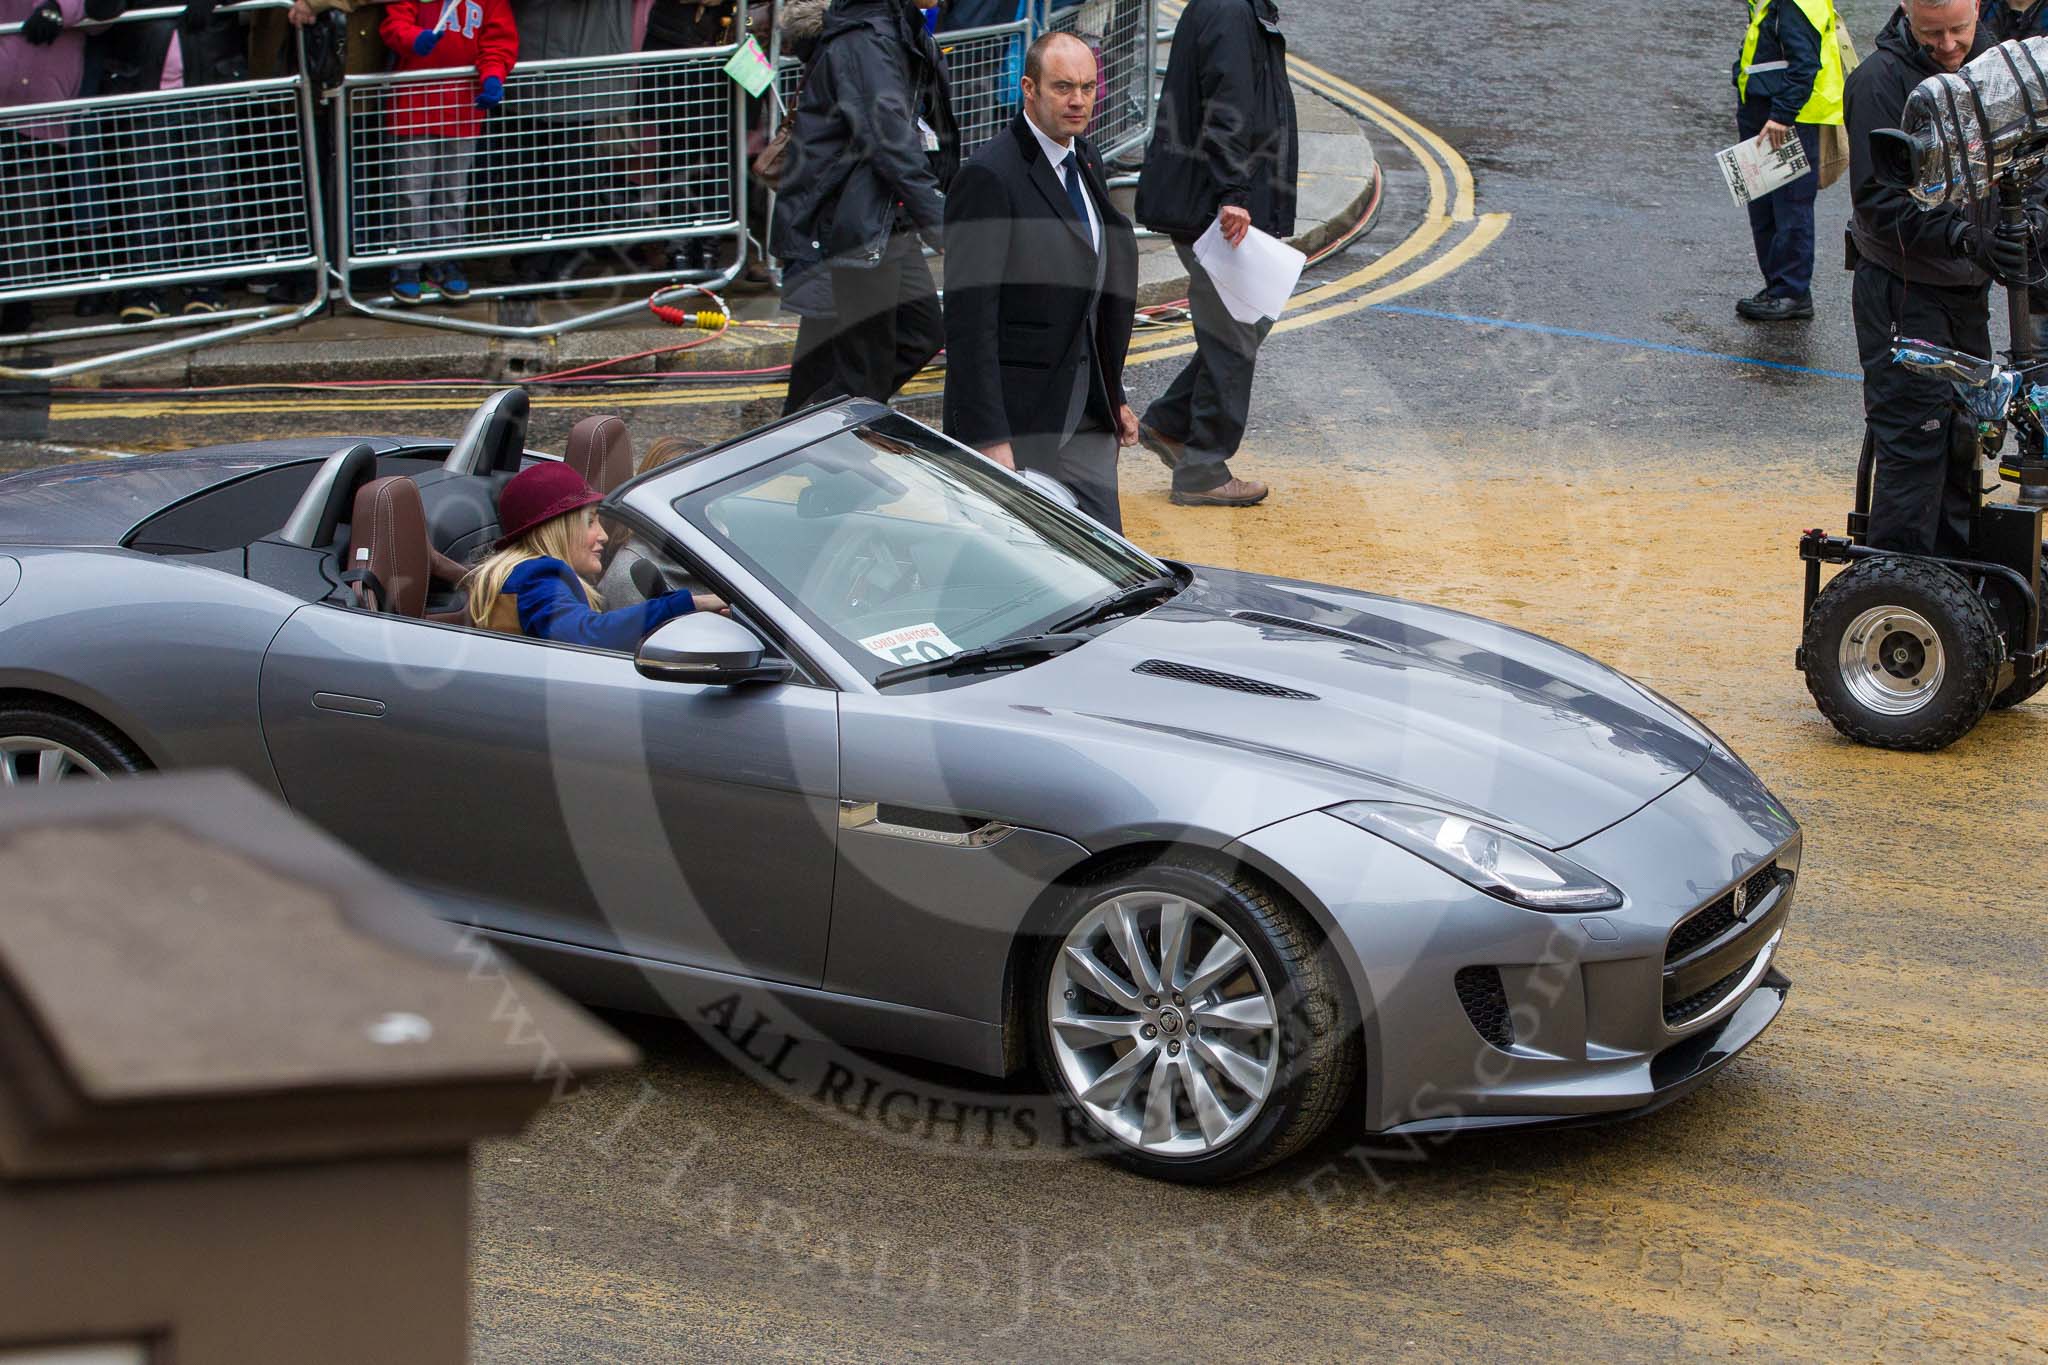 Lord Mayor's Show 2012: Entry 59 - Jaguar, here the new F-type, with the BBC's Helen Skelton in the passenger seat..
Press stand opposite Mansion House, City of London,
London,
Greater London,
United Kingdom,
on 10 November 2012 at 11:26, image #762